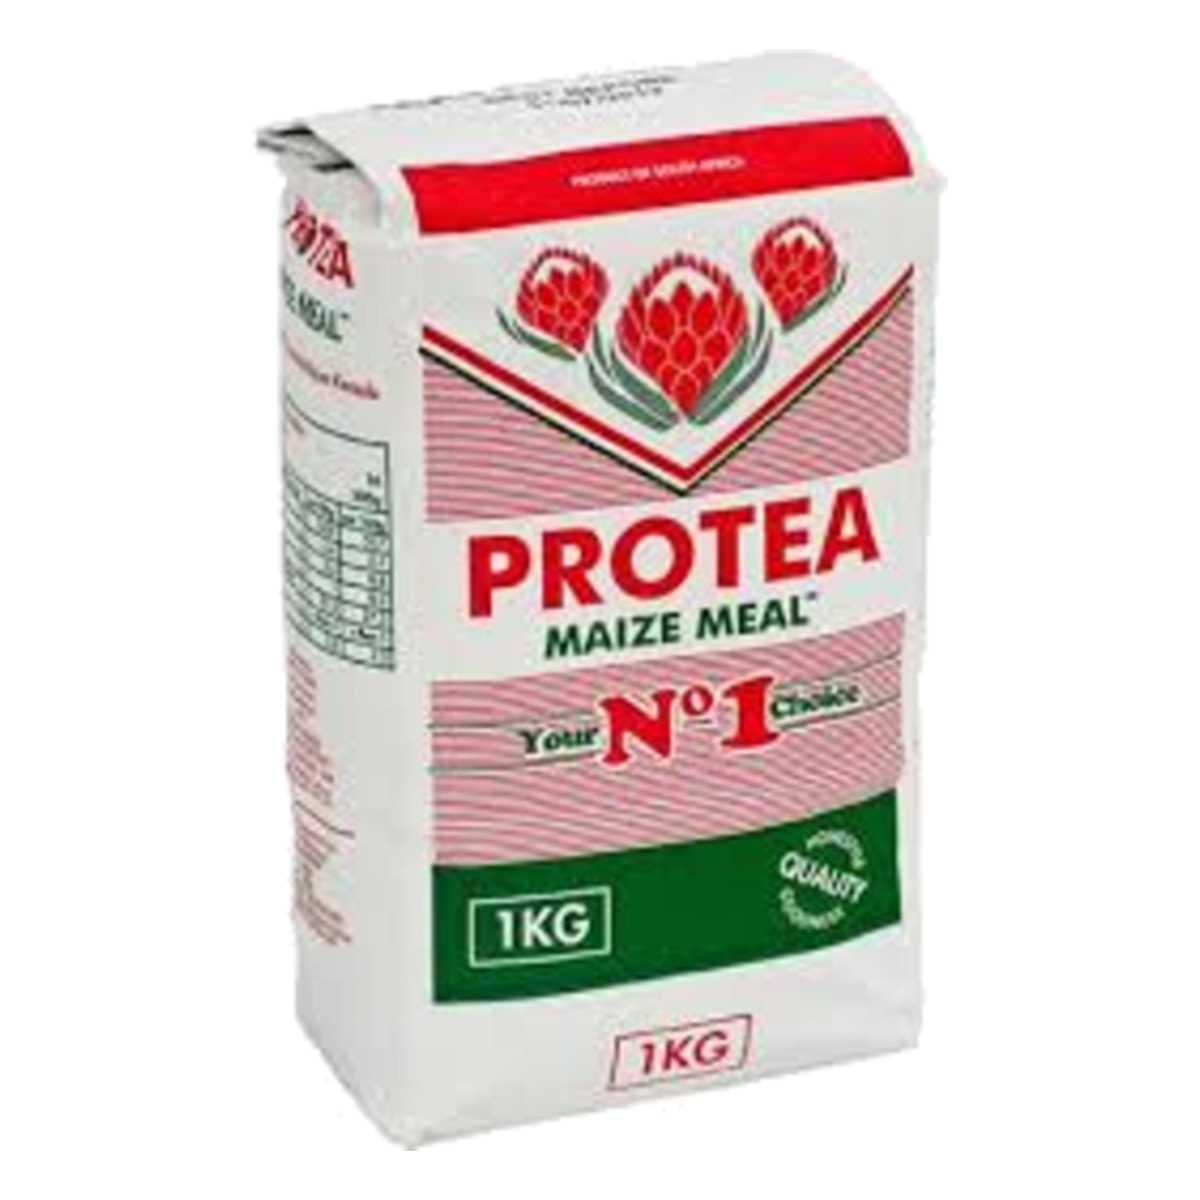 Buy Protea Foods Maize Meal - 1 kg